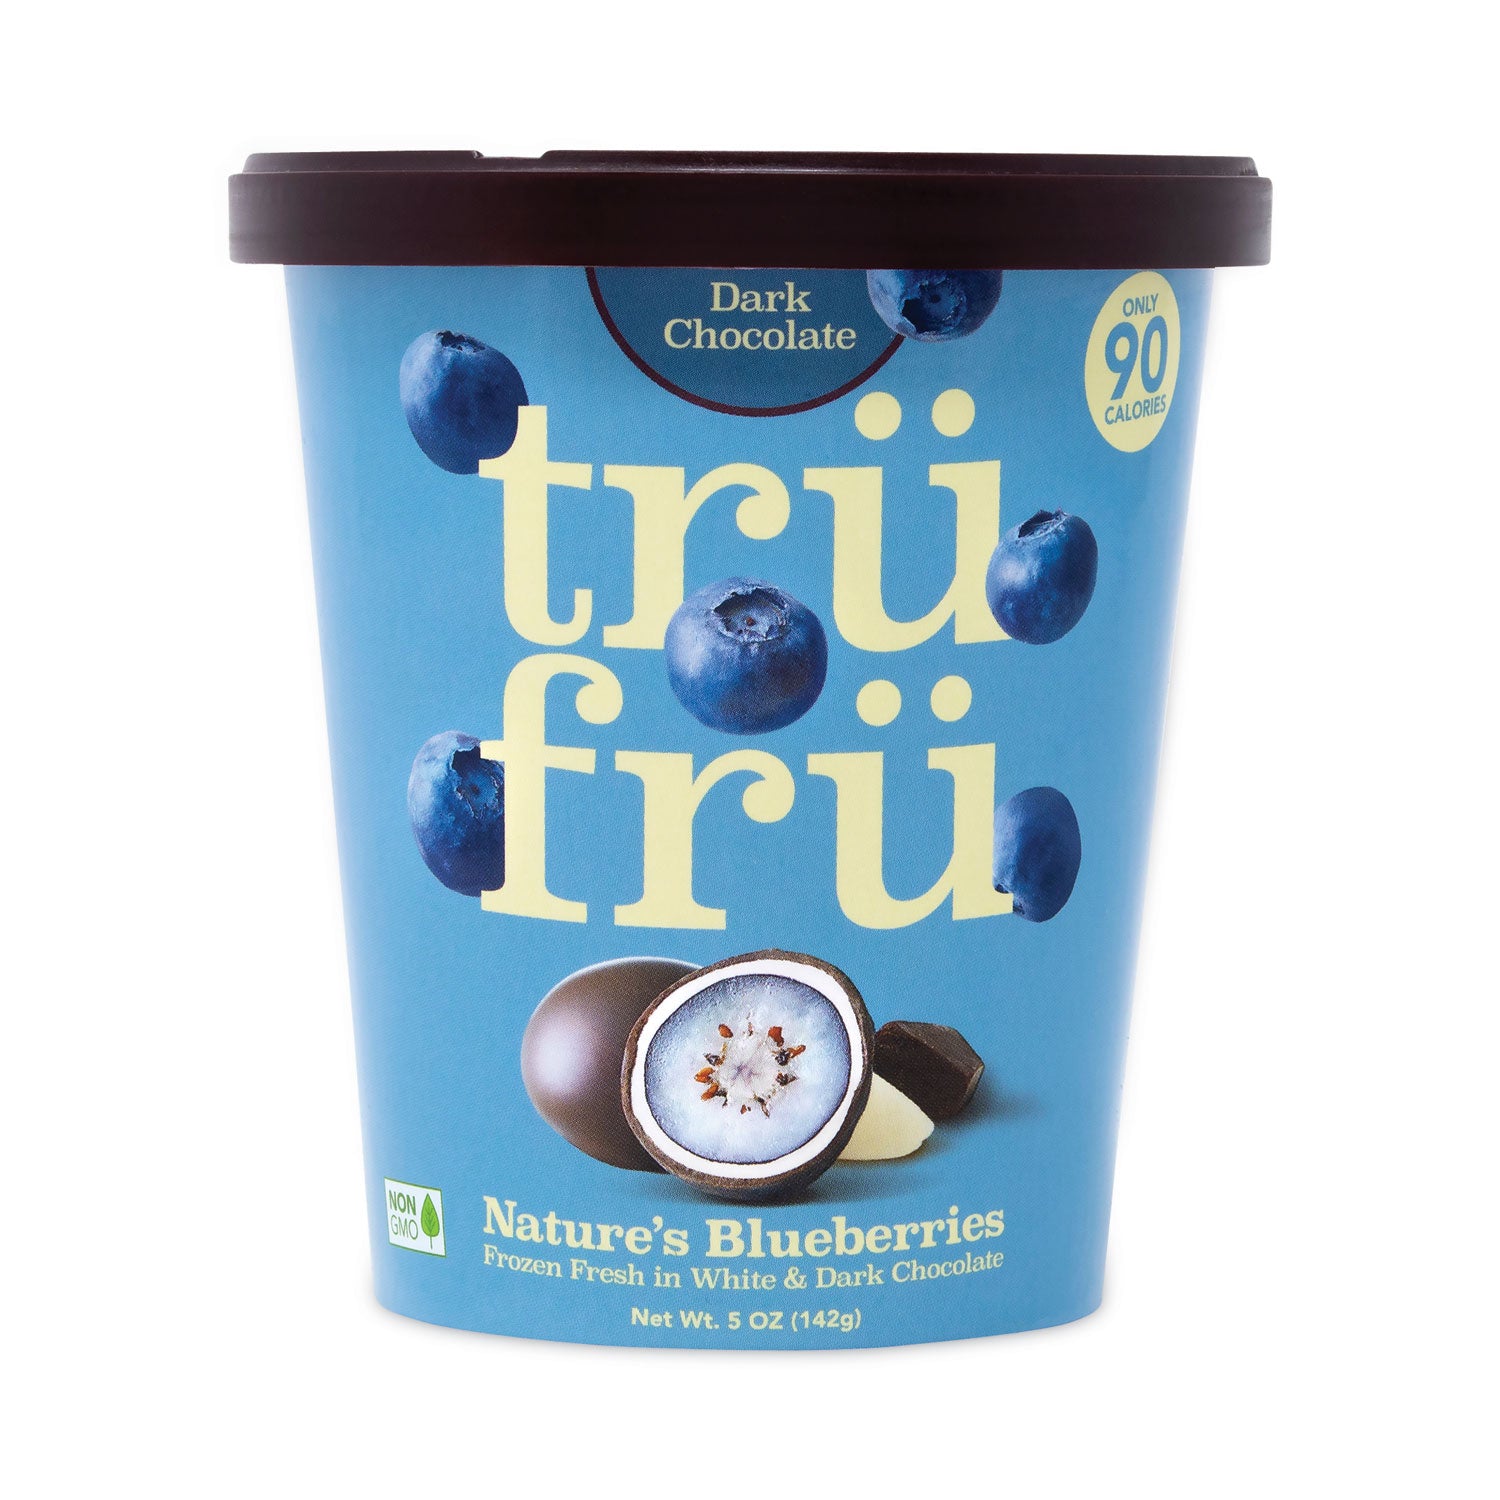 natures-hyper-chilled-blueberries-in-white-and-dark-chocolate-5-oz-cup-8-carton-ships-in-1-3-business-days_grr90300270 - 1